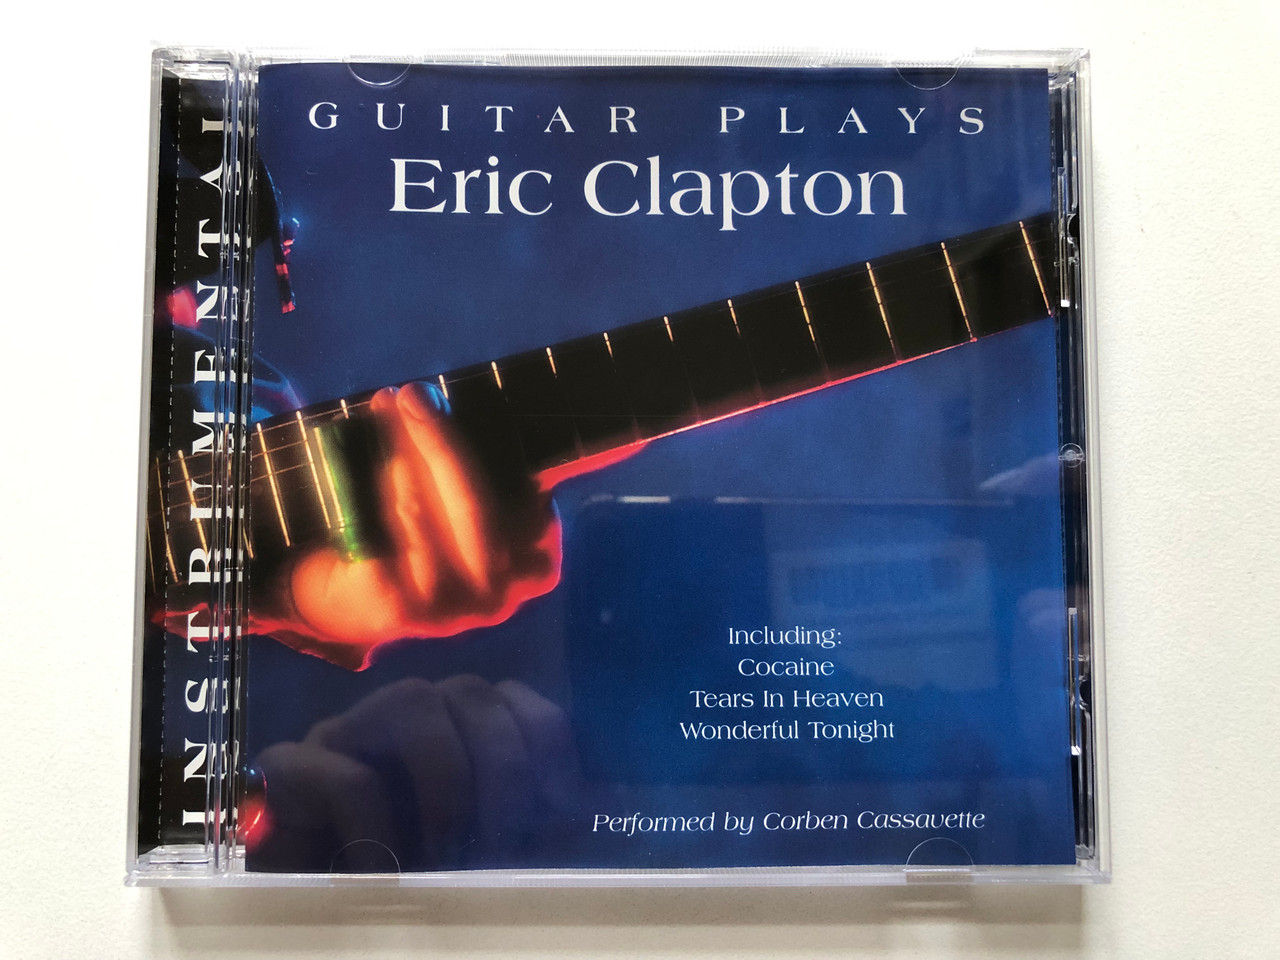 https://cdn10.bigcommerce.com/s-62bdpkt7pb/products/0/images/313409/Guitar_Plays_Eric_Clapton_-_Including_Cocaine_Tears_In_Heaven_Wonderful_Tonight_-_Performed_by_Corben_Cassavette_Elap_Music_Audio_CD_1999_50485082_1__01506.1700757499.1280.1280.JPG?c=2